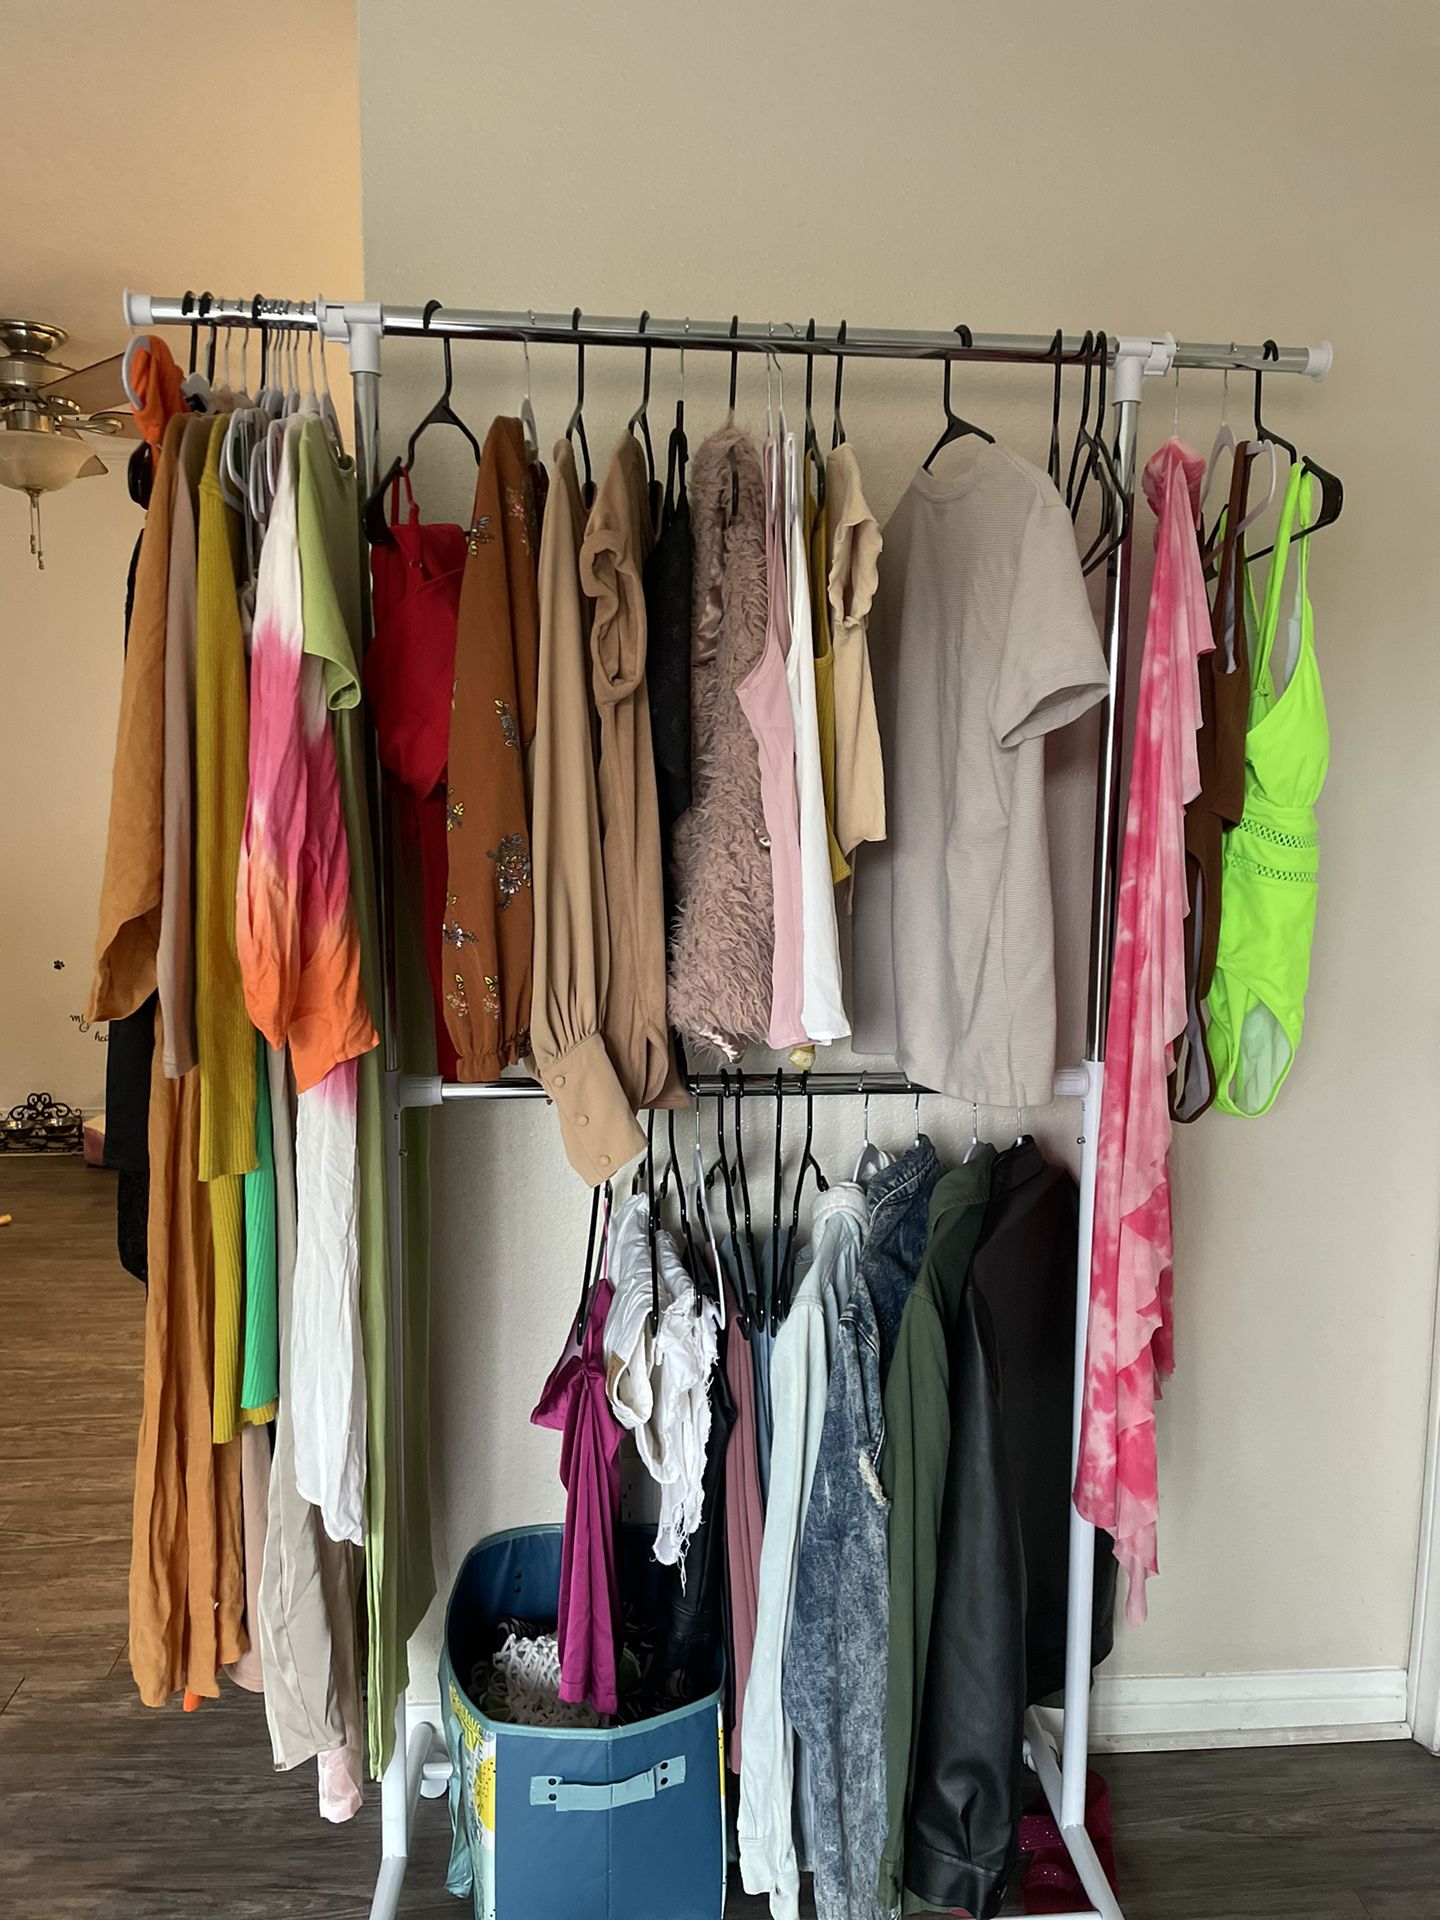 Lots Of Clothes, Low Price!